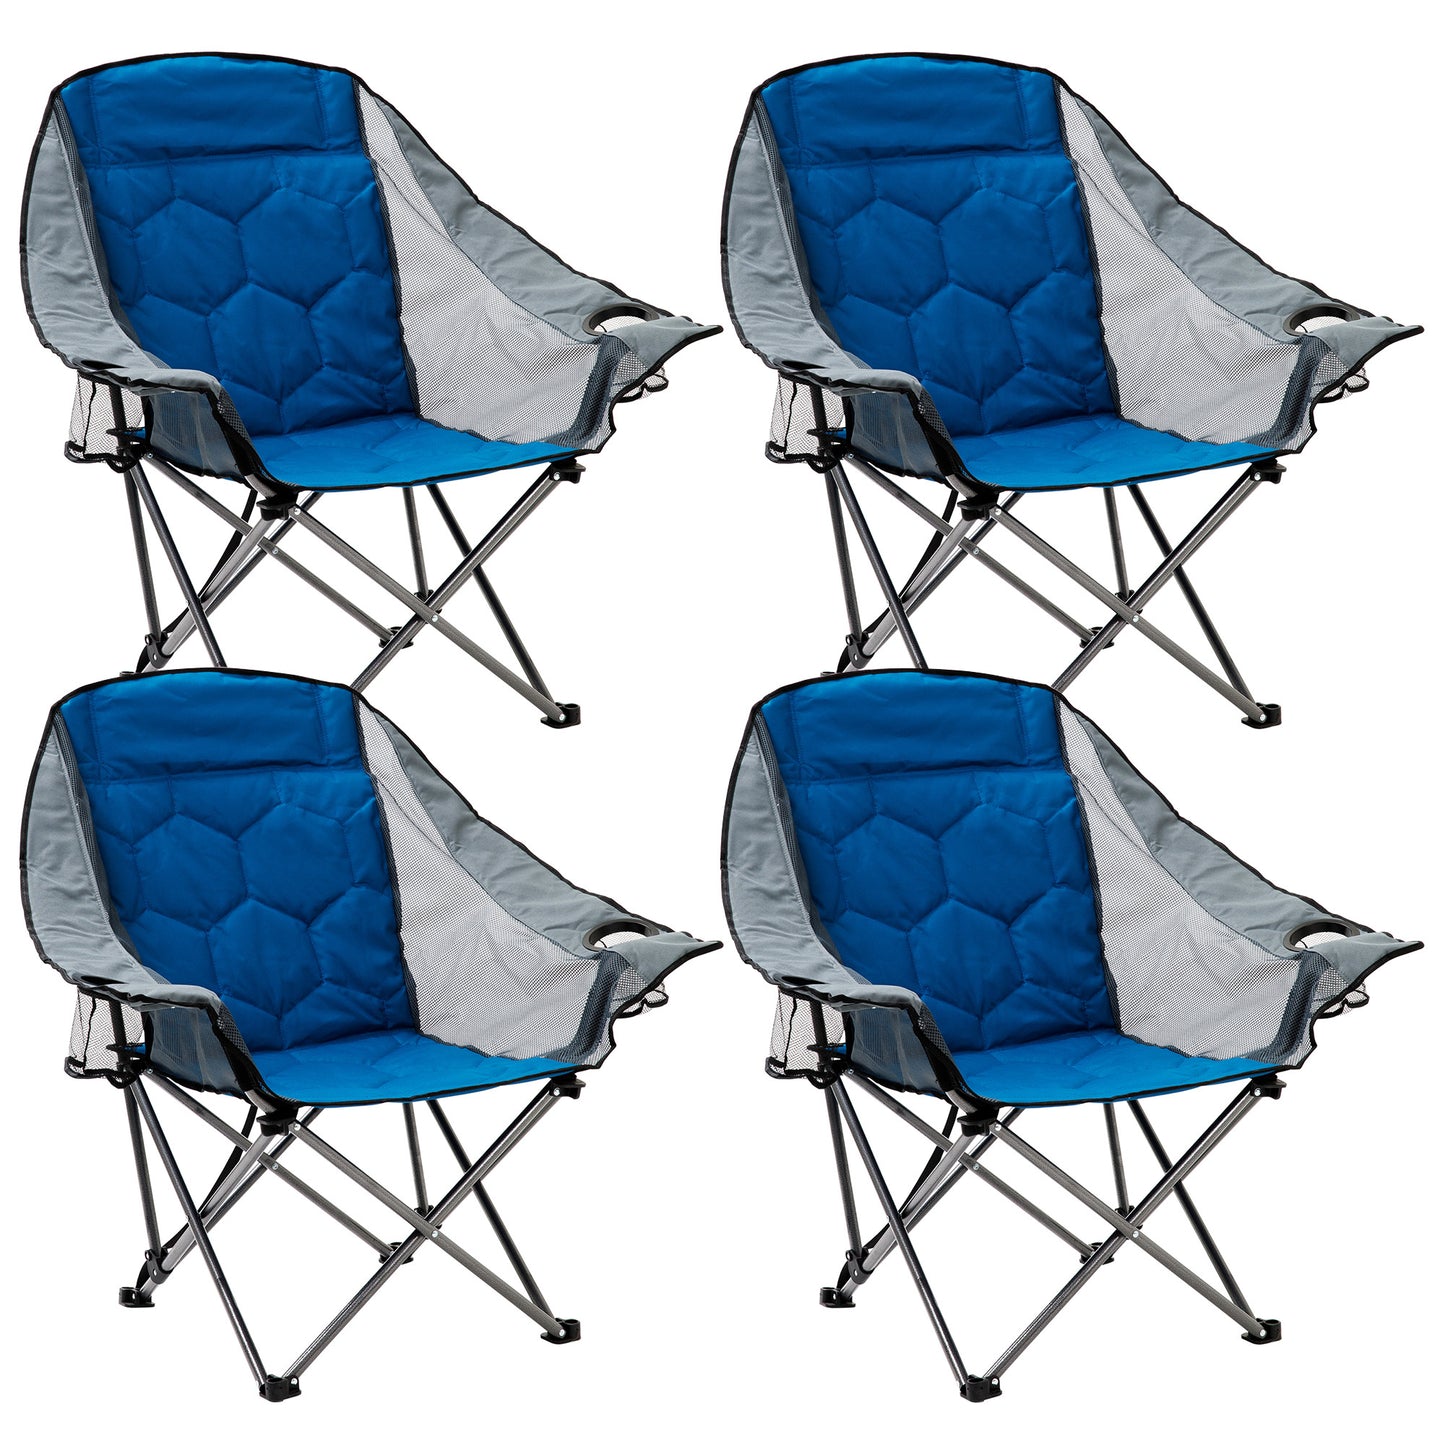 SUNNYFEEL XL Padded Oversized Camping Chair, Heavy Duty Folding Camp Chairs w/Cup Holder and Carry Bag, Portable Lawn Chairs, Foldable Outdoor Sofa for Adults, Sports, Tailgating, Beach,RVing